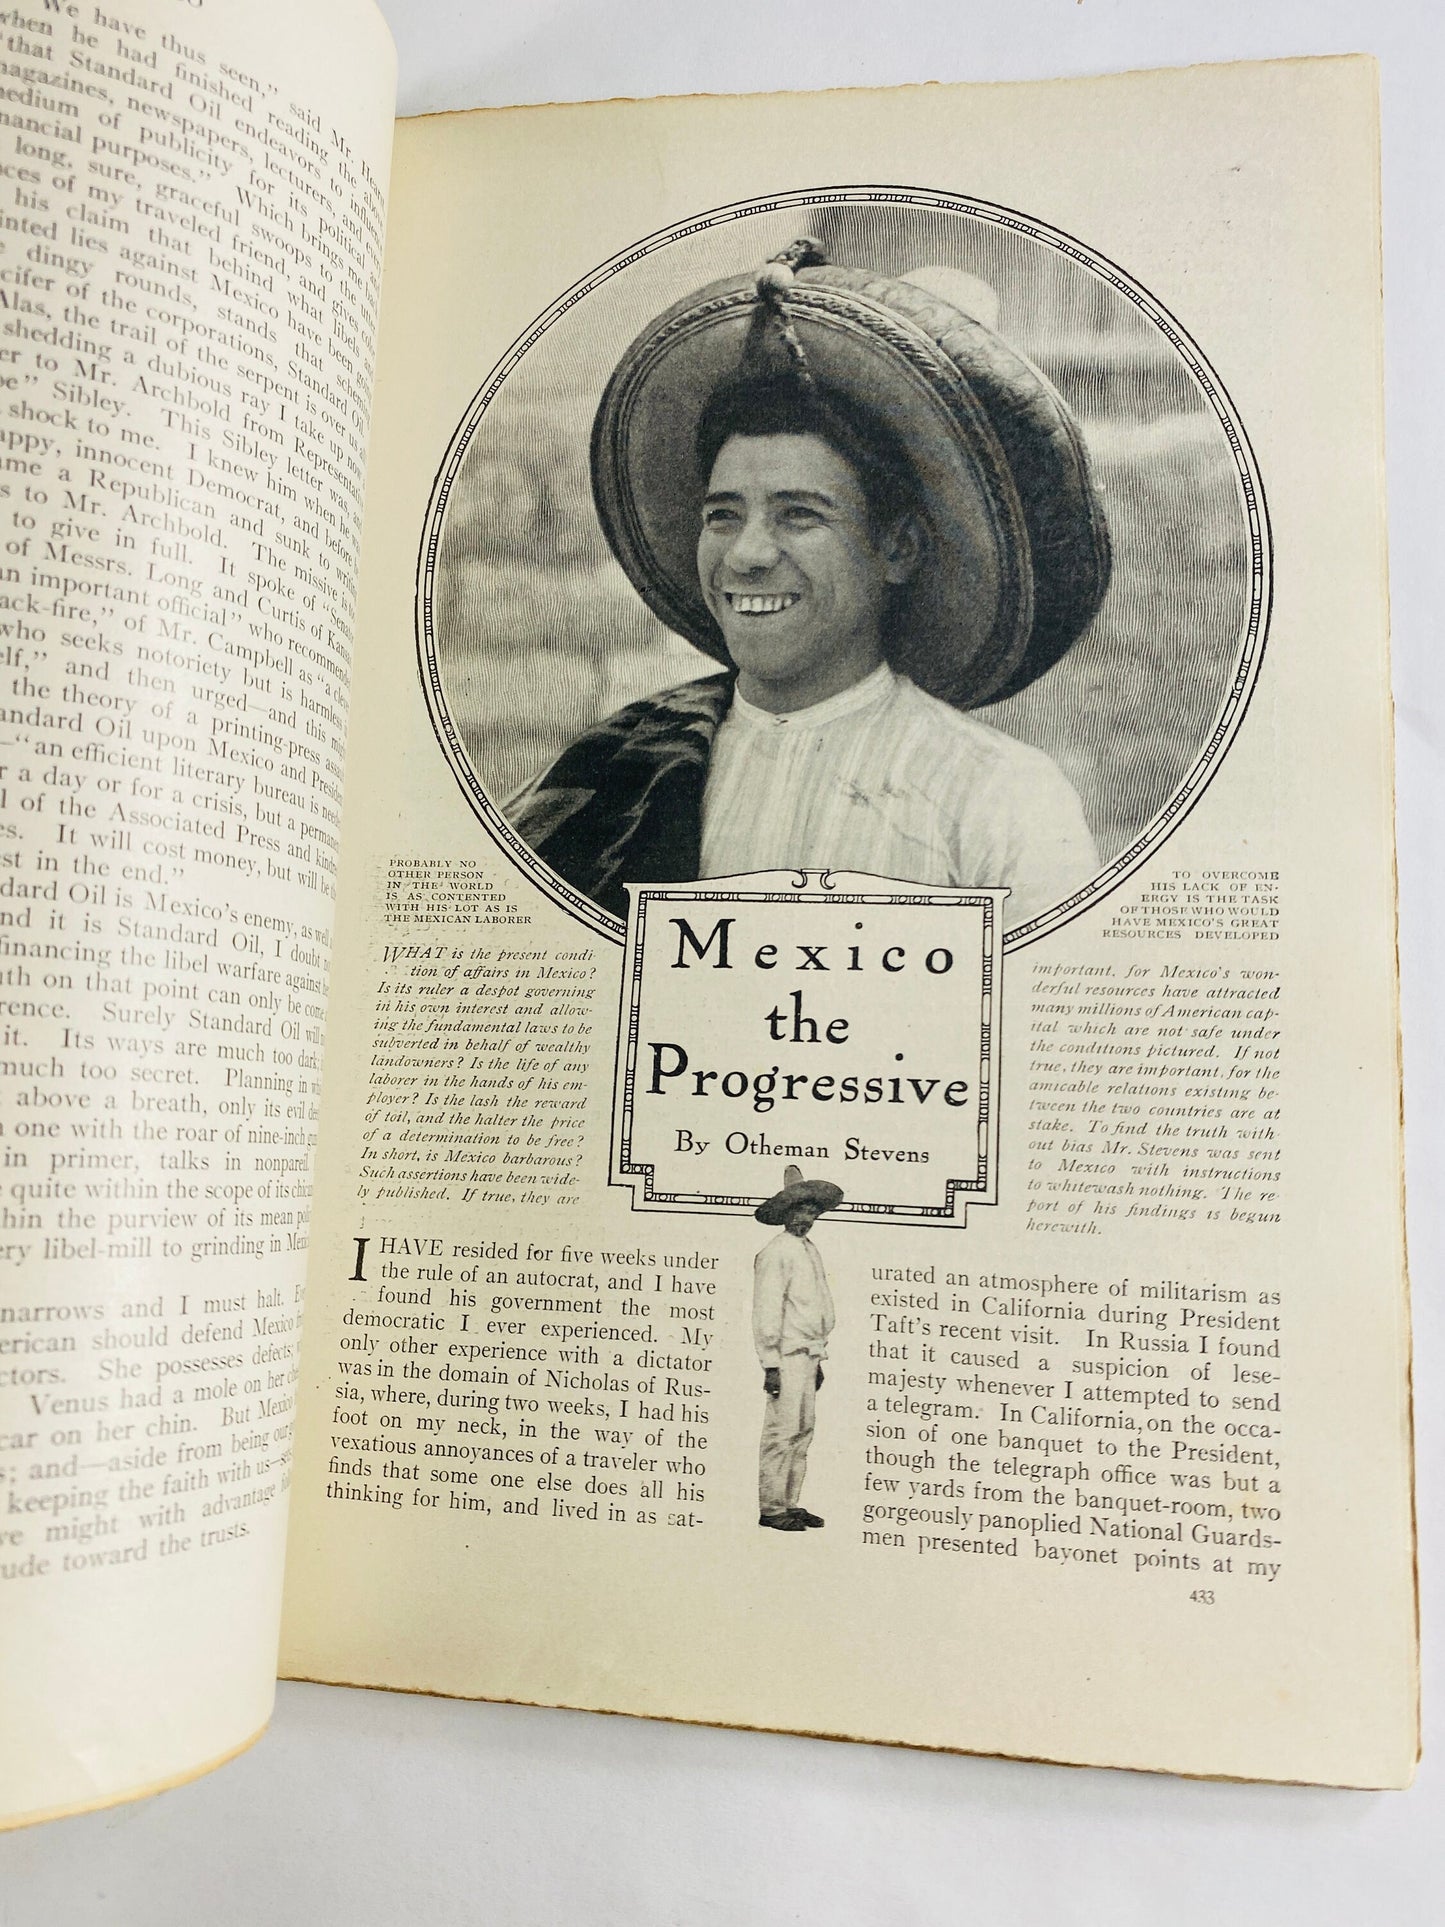 1910 vintage Cosmopolitan Magazine Vol 48 No 4 featuring Story of Charlemagne and Maligners of Mexico